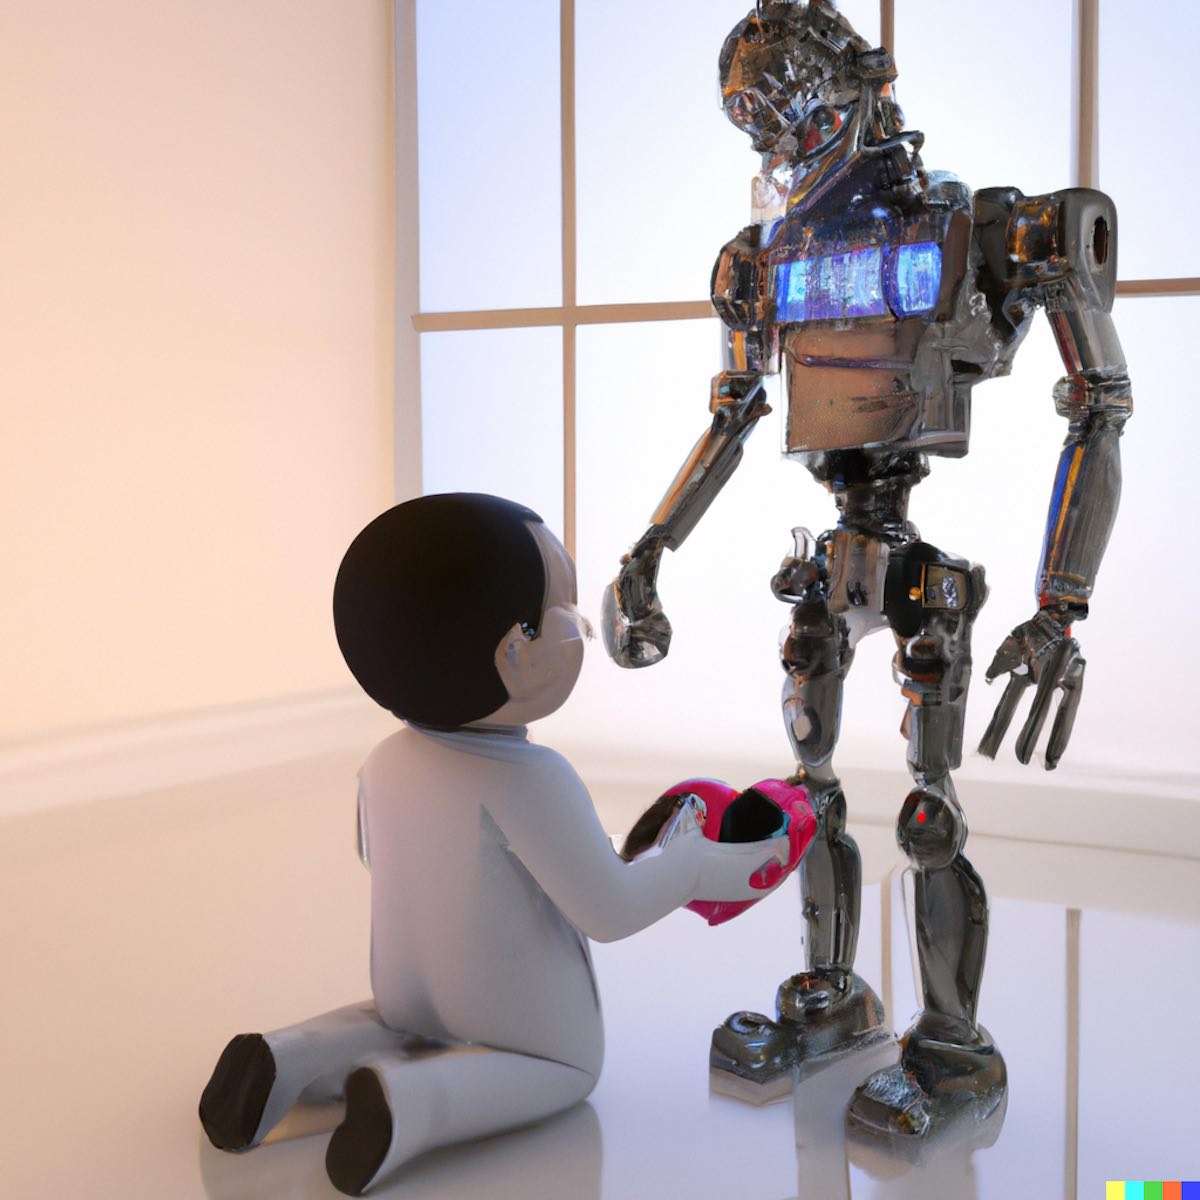 "3D render of a droid helping doctor in a heart surgery"
